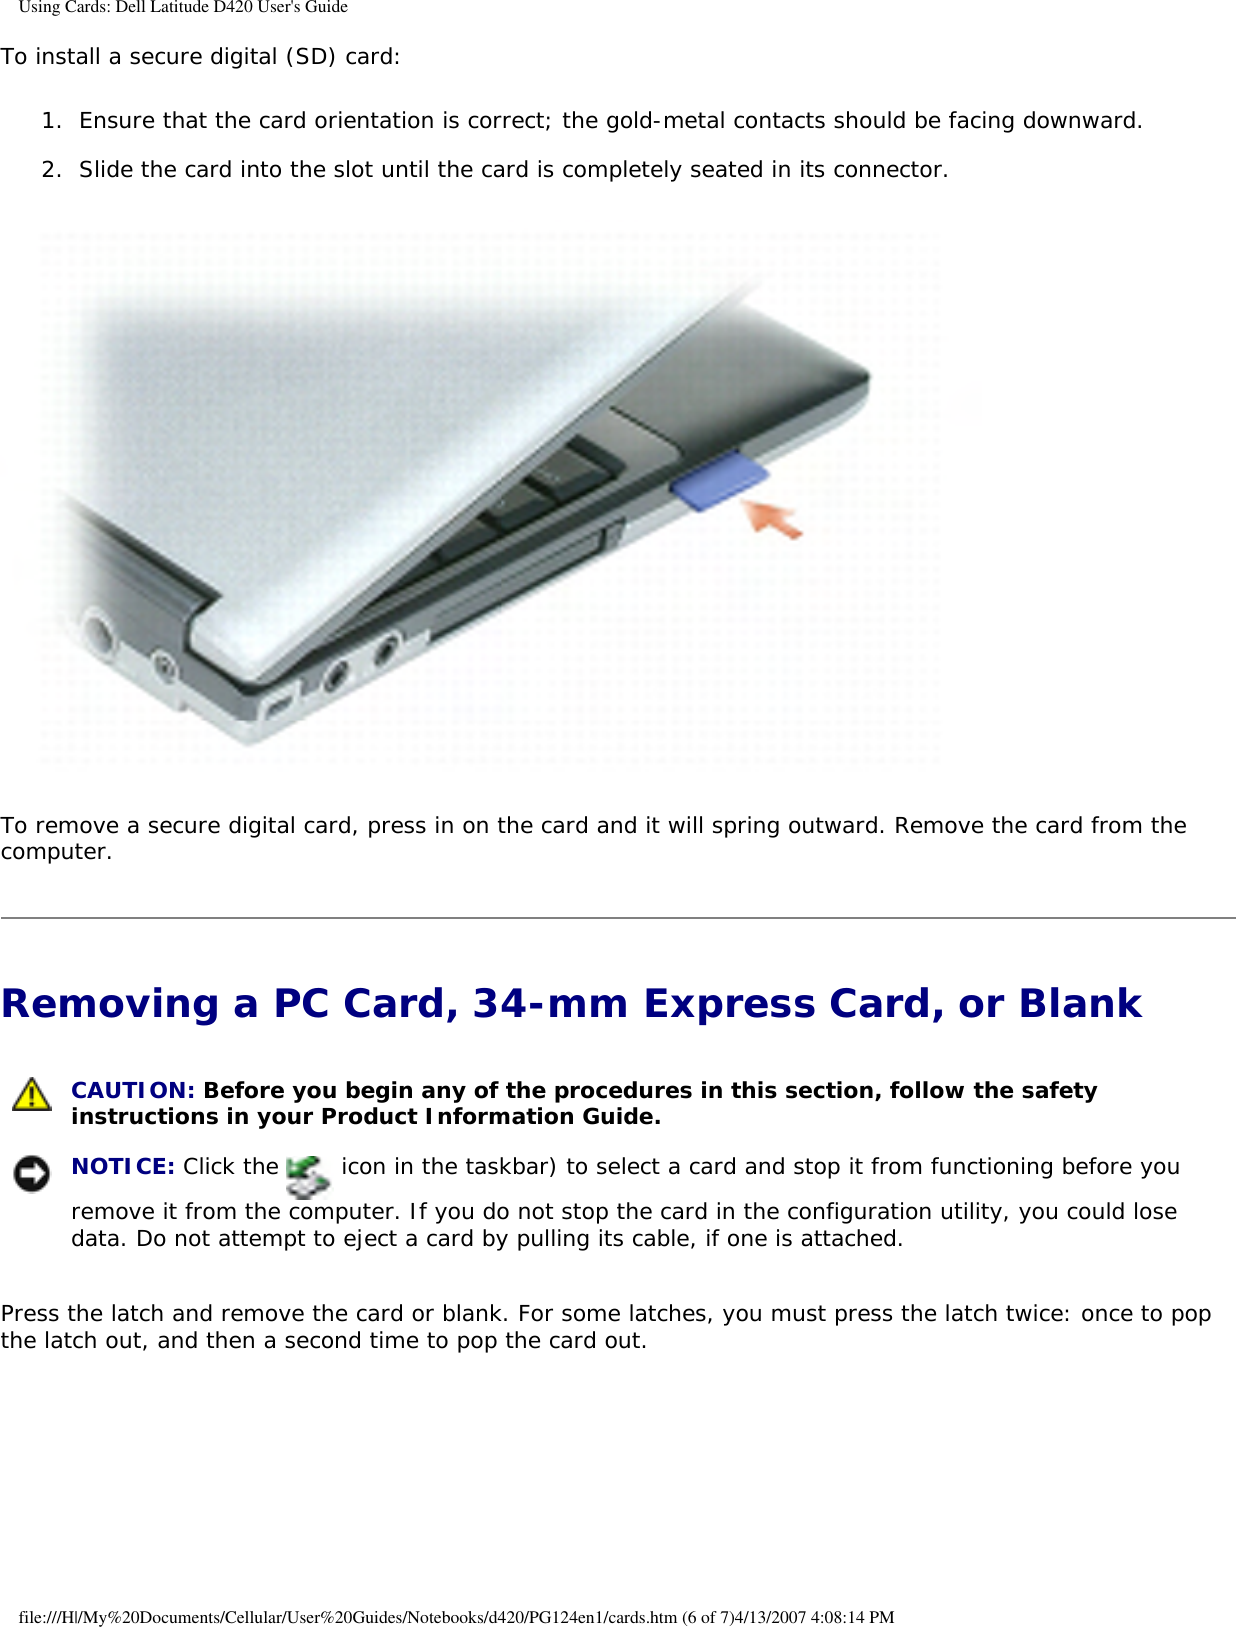 Using Cards: Dell Latitude D420 User&apos;s GuideTo install a secure digital (SD) card:1.  Ensure that the card orientation is correct; the gold-metal contacts should be facing downward.   2.  Slide the card into the slot until the card is completely seated in its connector.    To remove a secure digital card, press in on the card and it will spring outward. Remove the card from the computer.Removing a PC Card, 34-mm Express Card, or Blank  CAUTION: Before you begin any of the procedures in this section, follow the safety instructions in your Product Information Guide.  NOTICE: Click the   icon in the taskbar) to select a card and stop it from functioning before you remove it from the computer. If you do not stop the card in the configuration utility, you could lose data. Do not attempt to eject a card by pulling its cable, if one is attached. Press the latch and remove the card or blank. For some latches, you must press the latch twice: once to pop the latch out, and then a second time to pop the card out.file:///H|/My%20Documents/Cellular/User%20Guides/Notebooks/d420/PG124en1/cards.htm (6 of 7)4/13/2007 4:08:14 PM